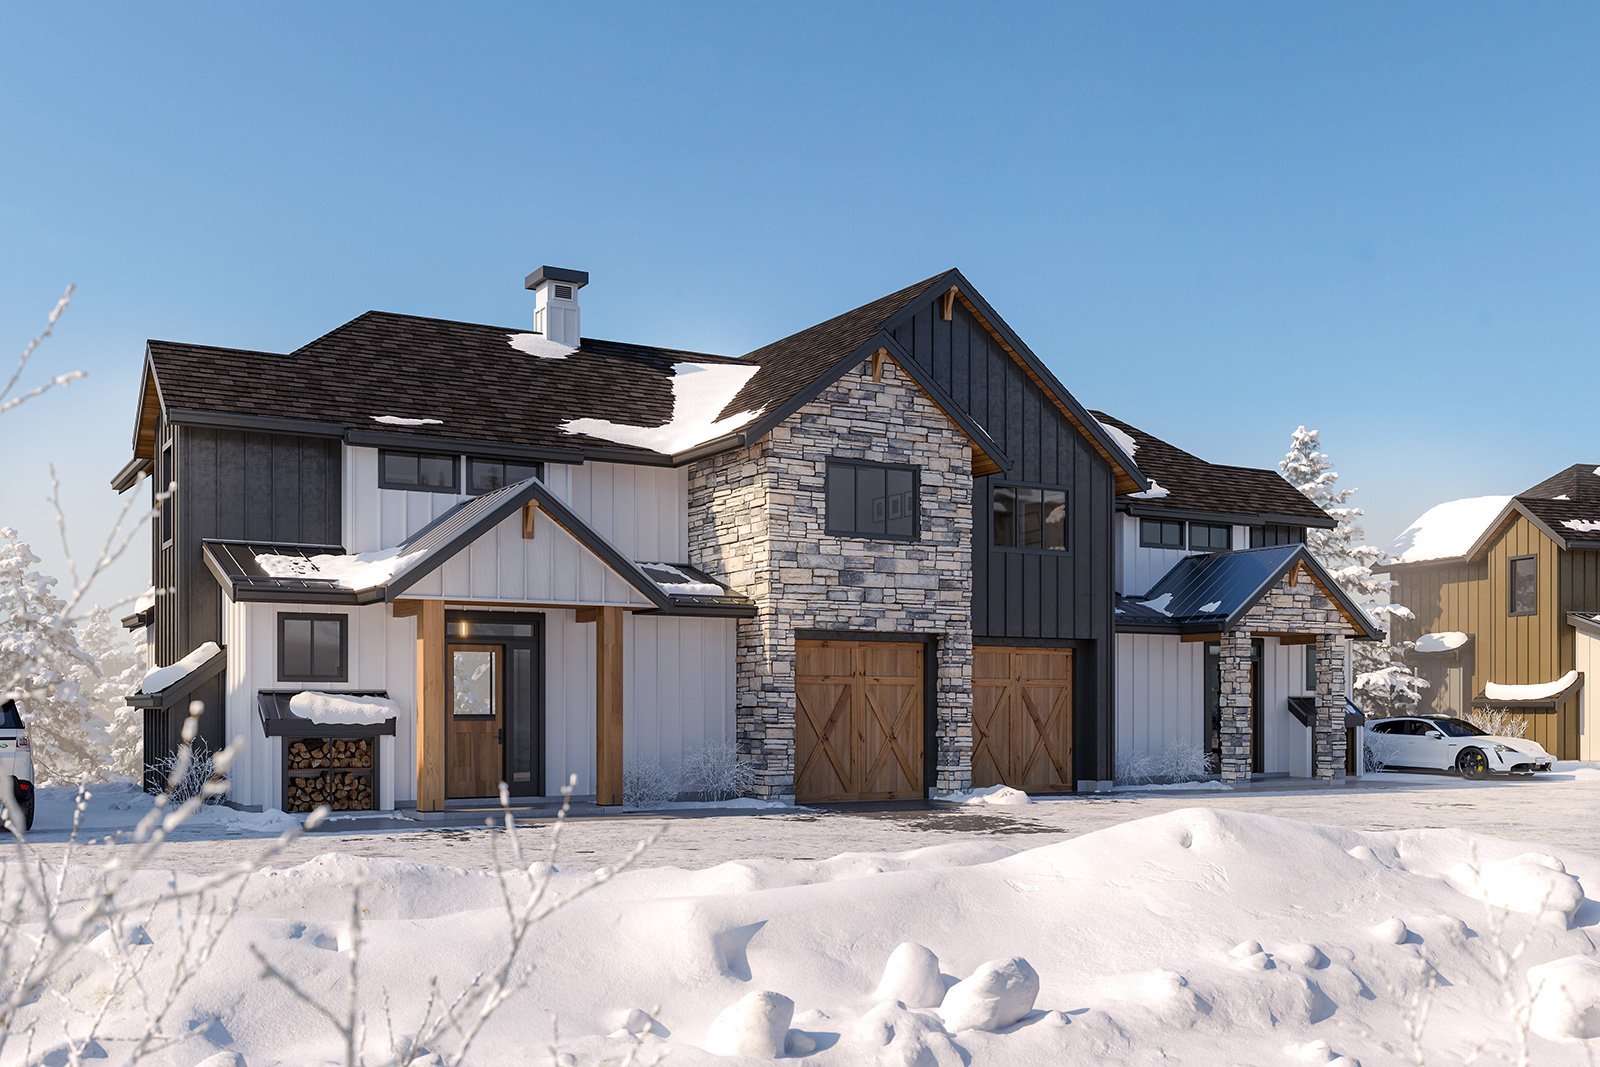 A collection of luxury duplex, triplex, and single-family homes at Big White.